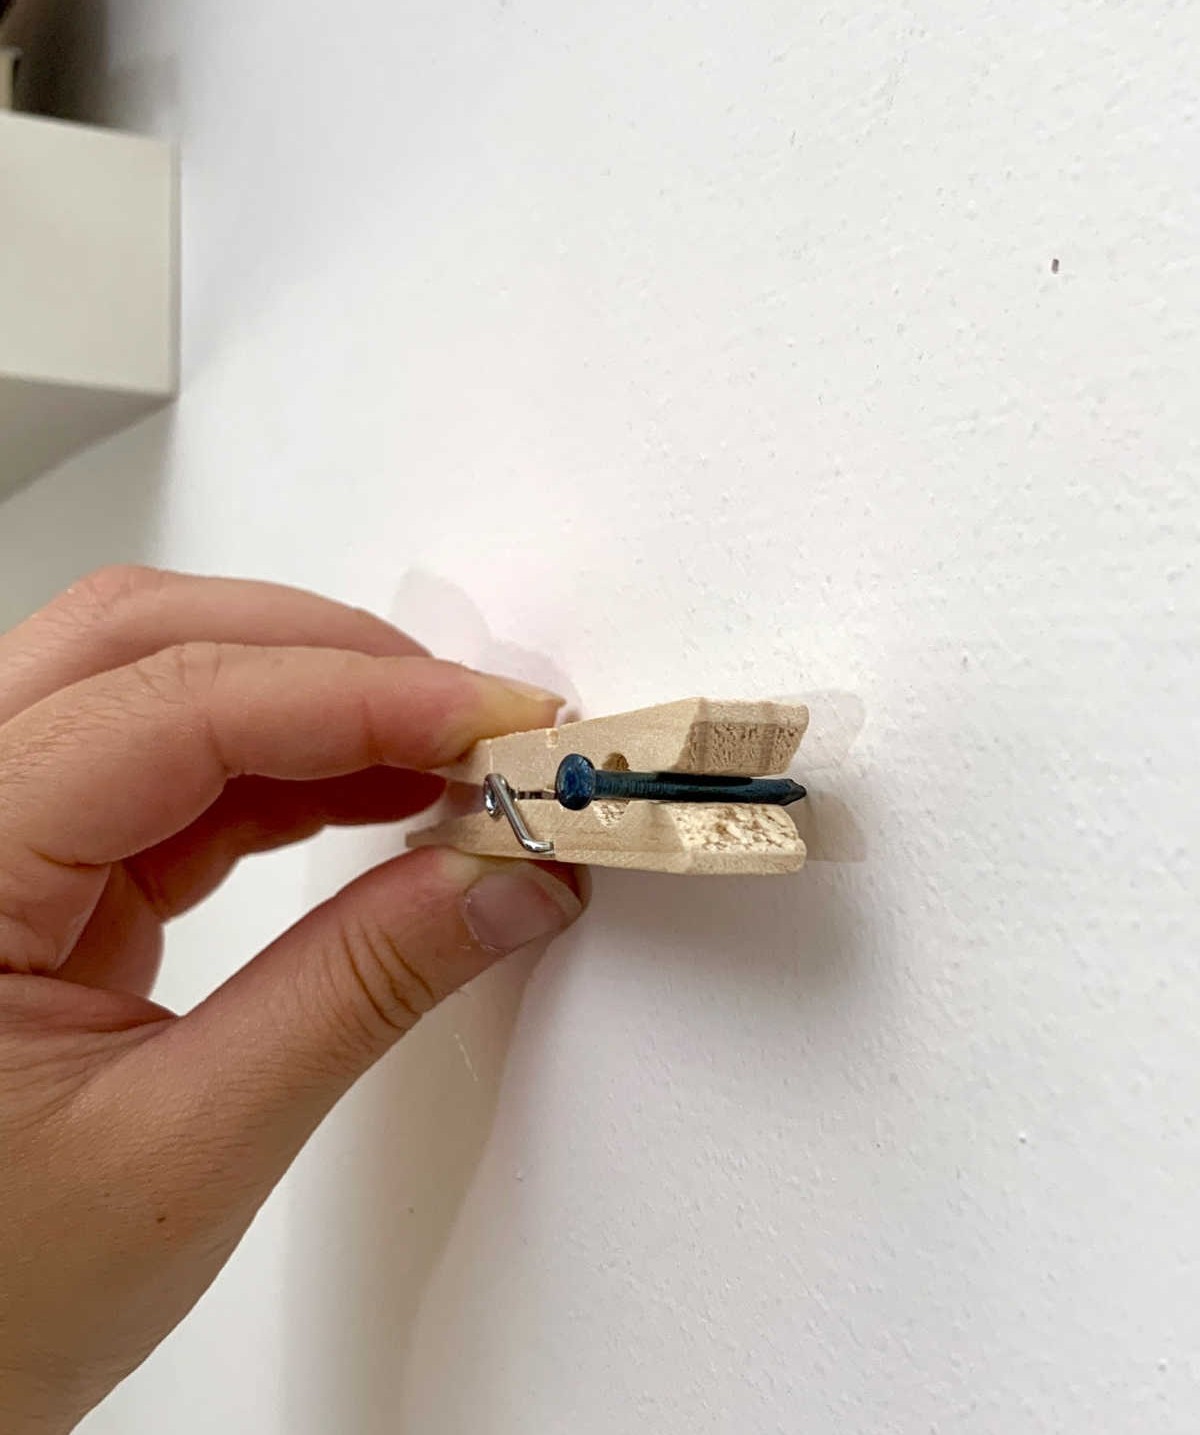 Use a Clothes Peg to Hold a Nail in Place